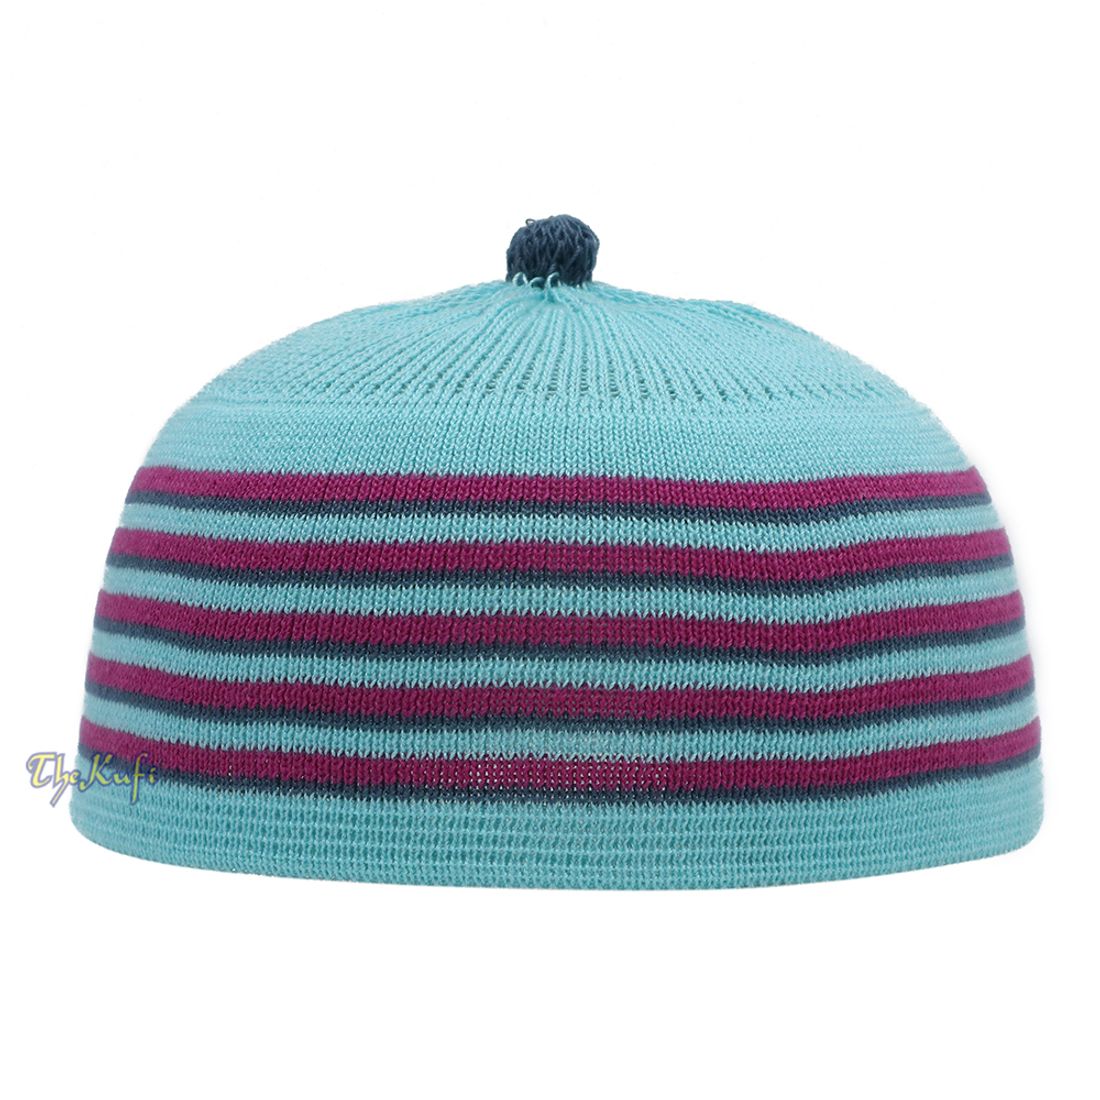 Light Turquoise Blue with Light Maroon and Dark Green Lines Baby or Infant Kufi Pompom Stretchable Beanie